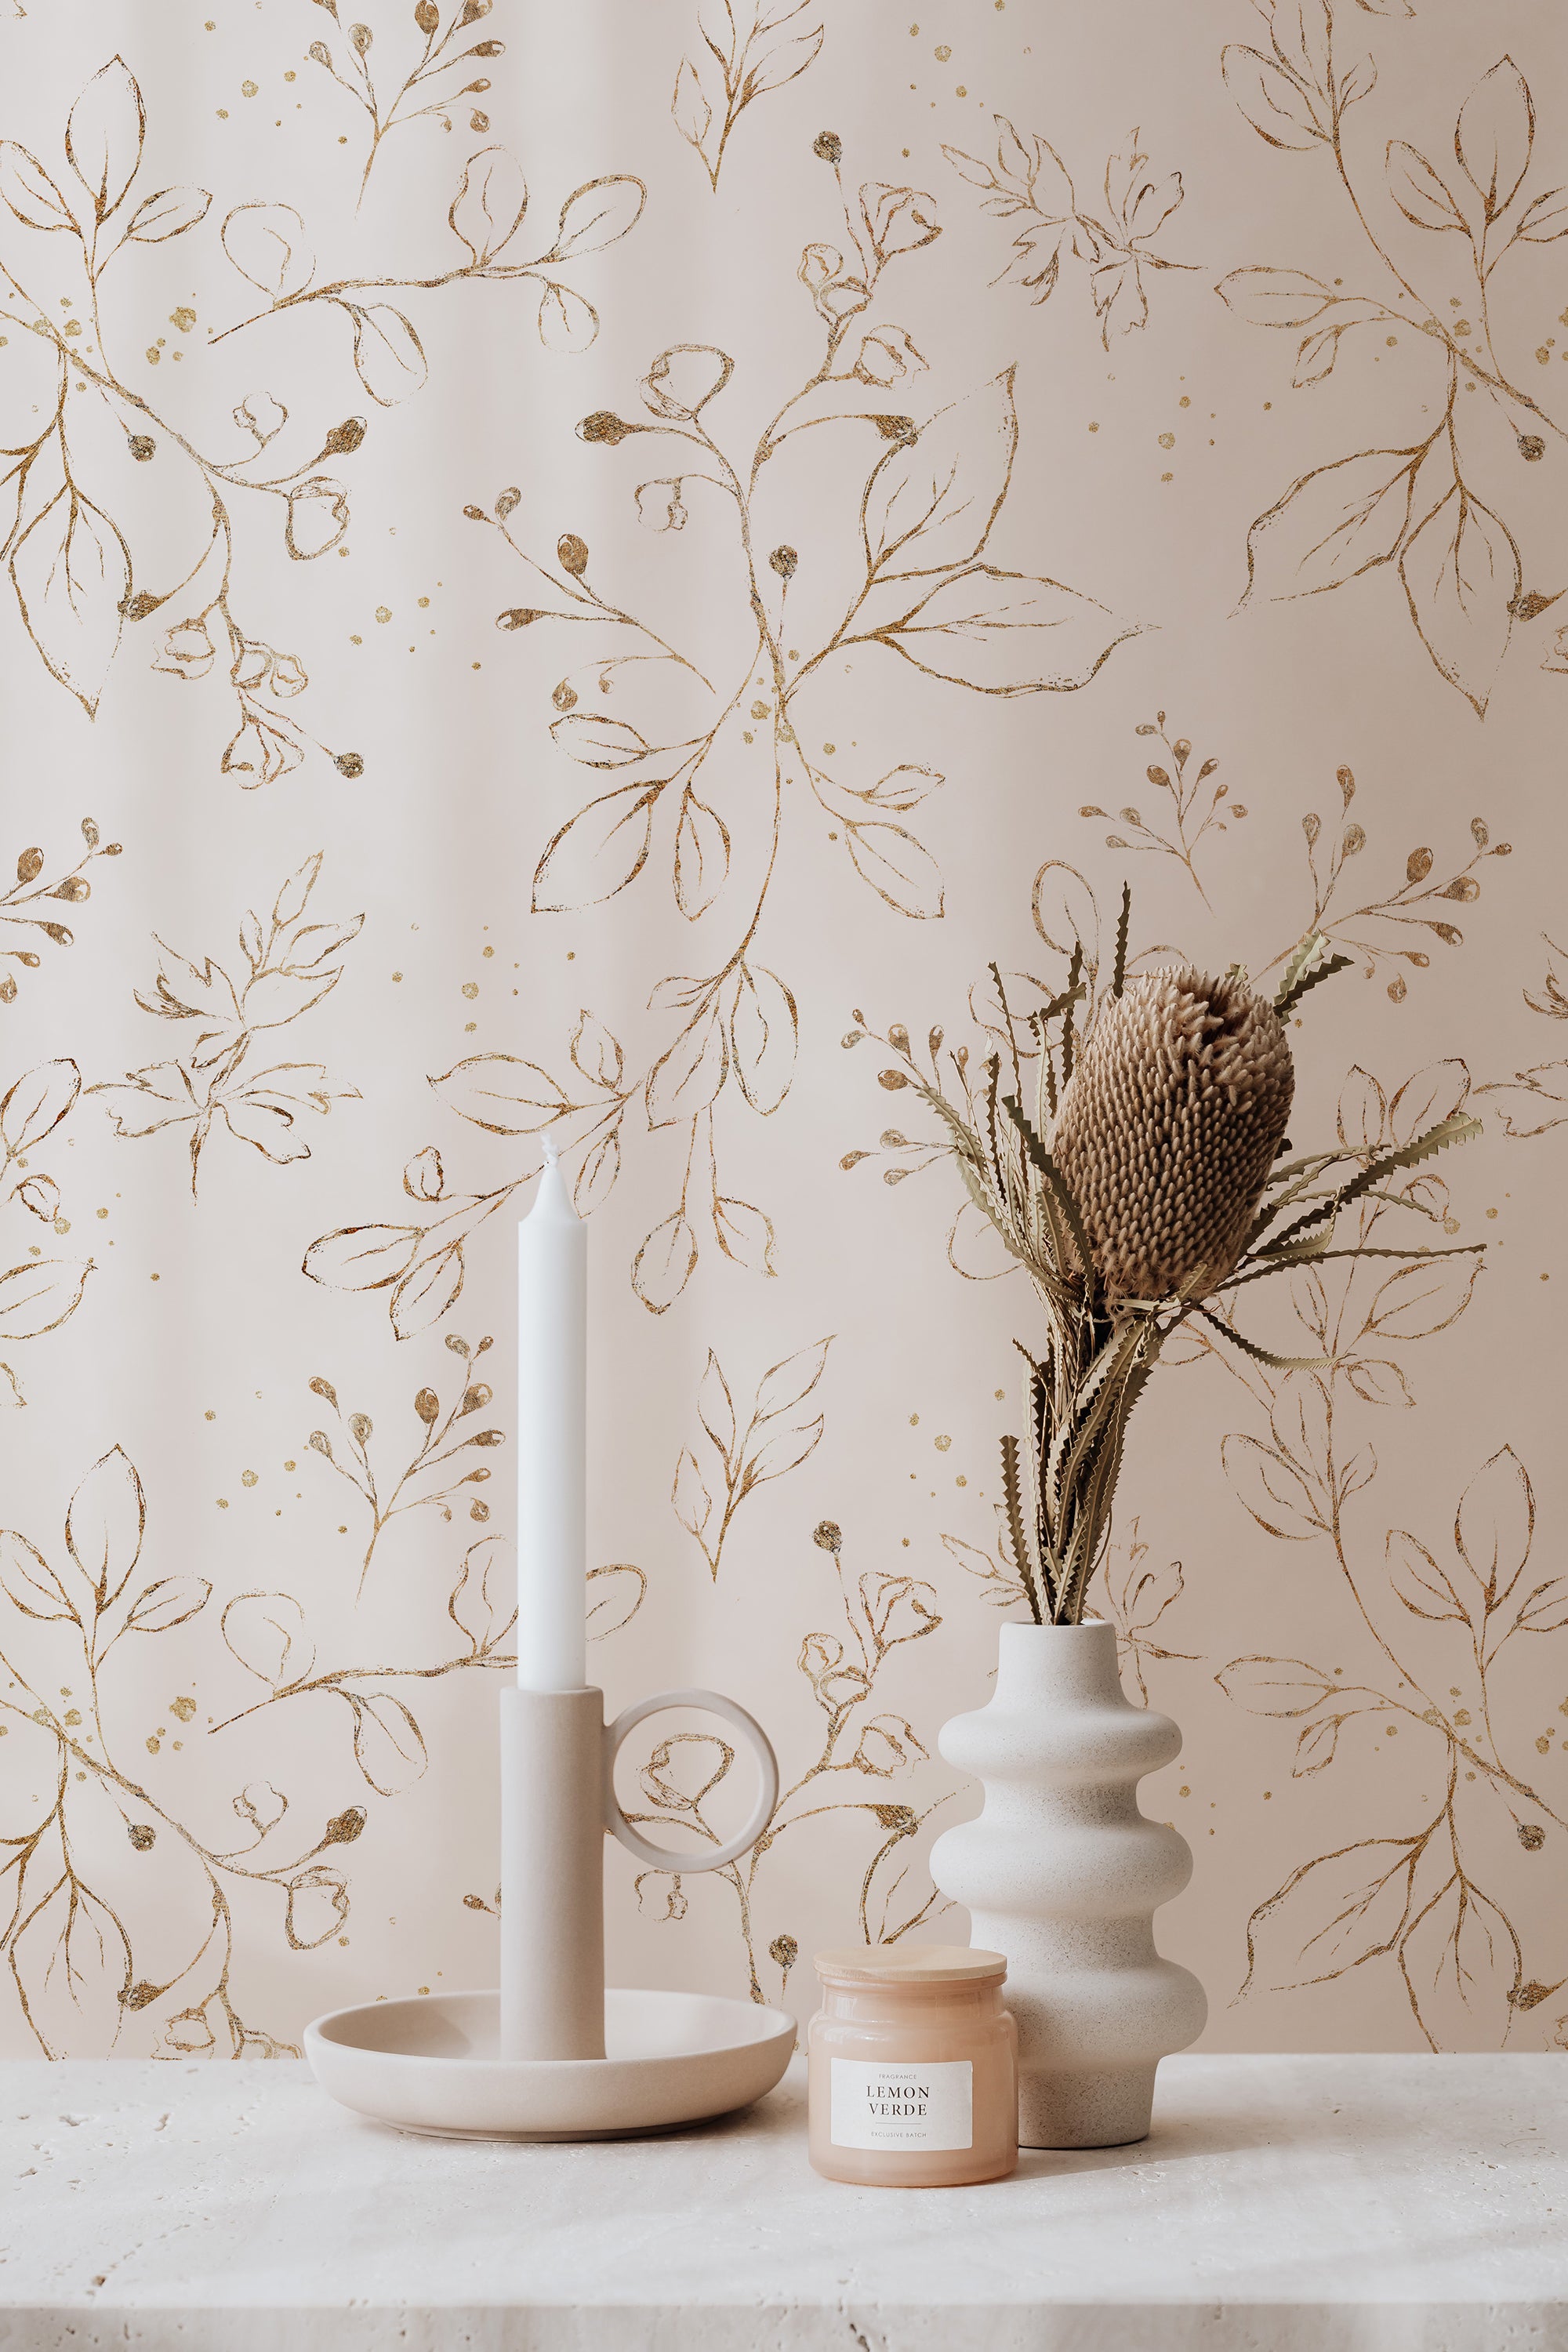 An elegant and sophisticated interior decor featuring Gold Leaves Wallpaper with hand-painted gold foliage patterns on a creamy background, complemented by a chic ceramic vase and candle holder.